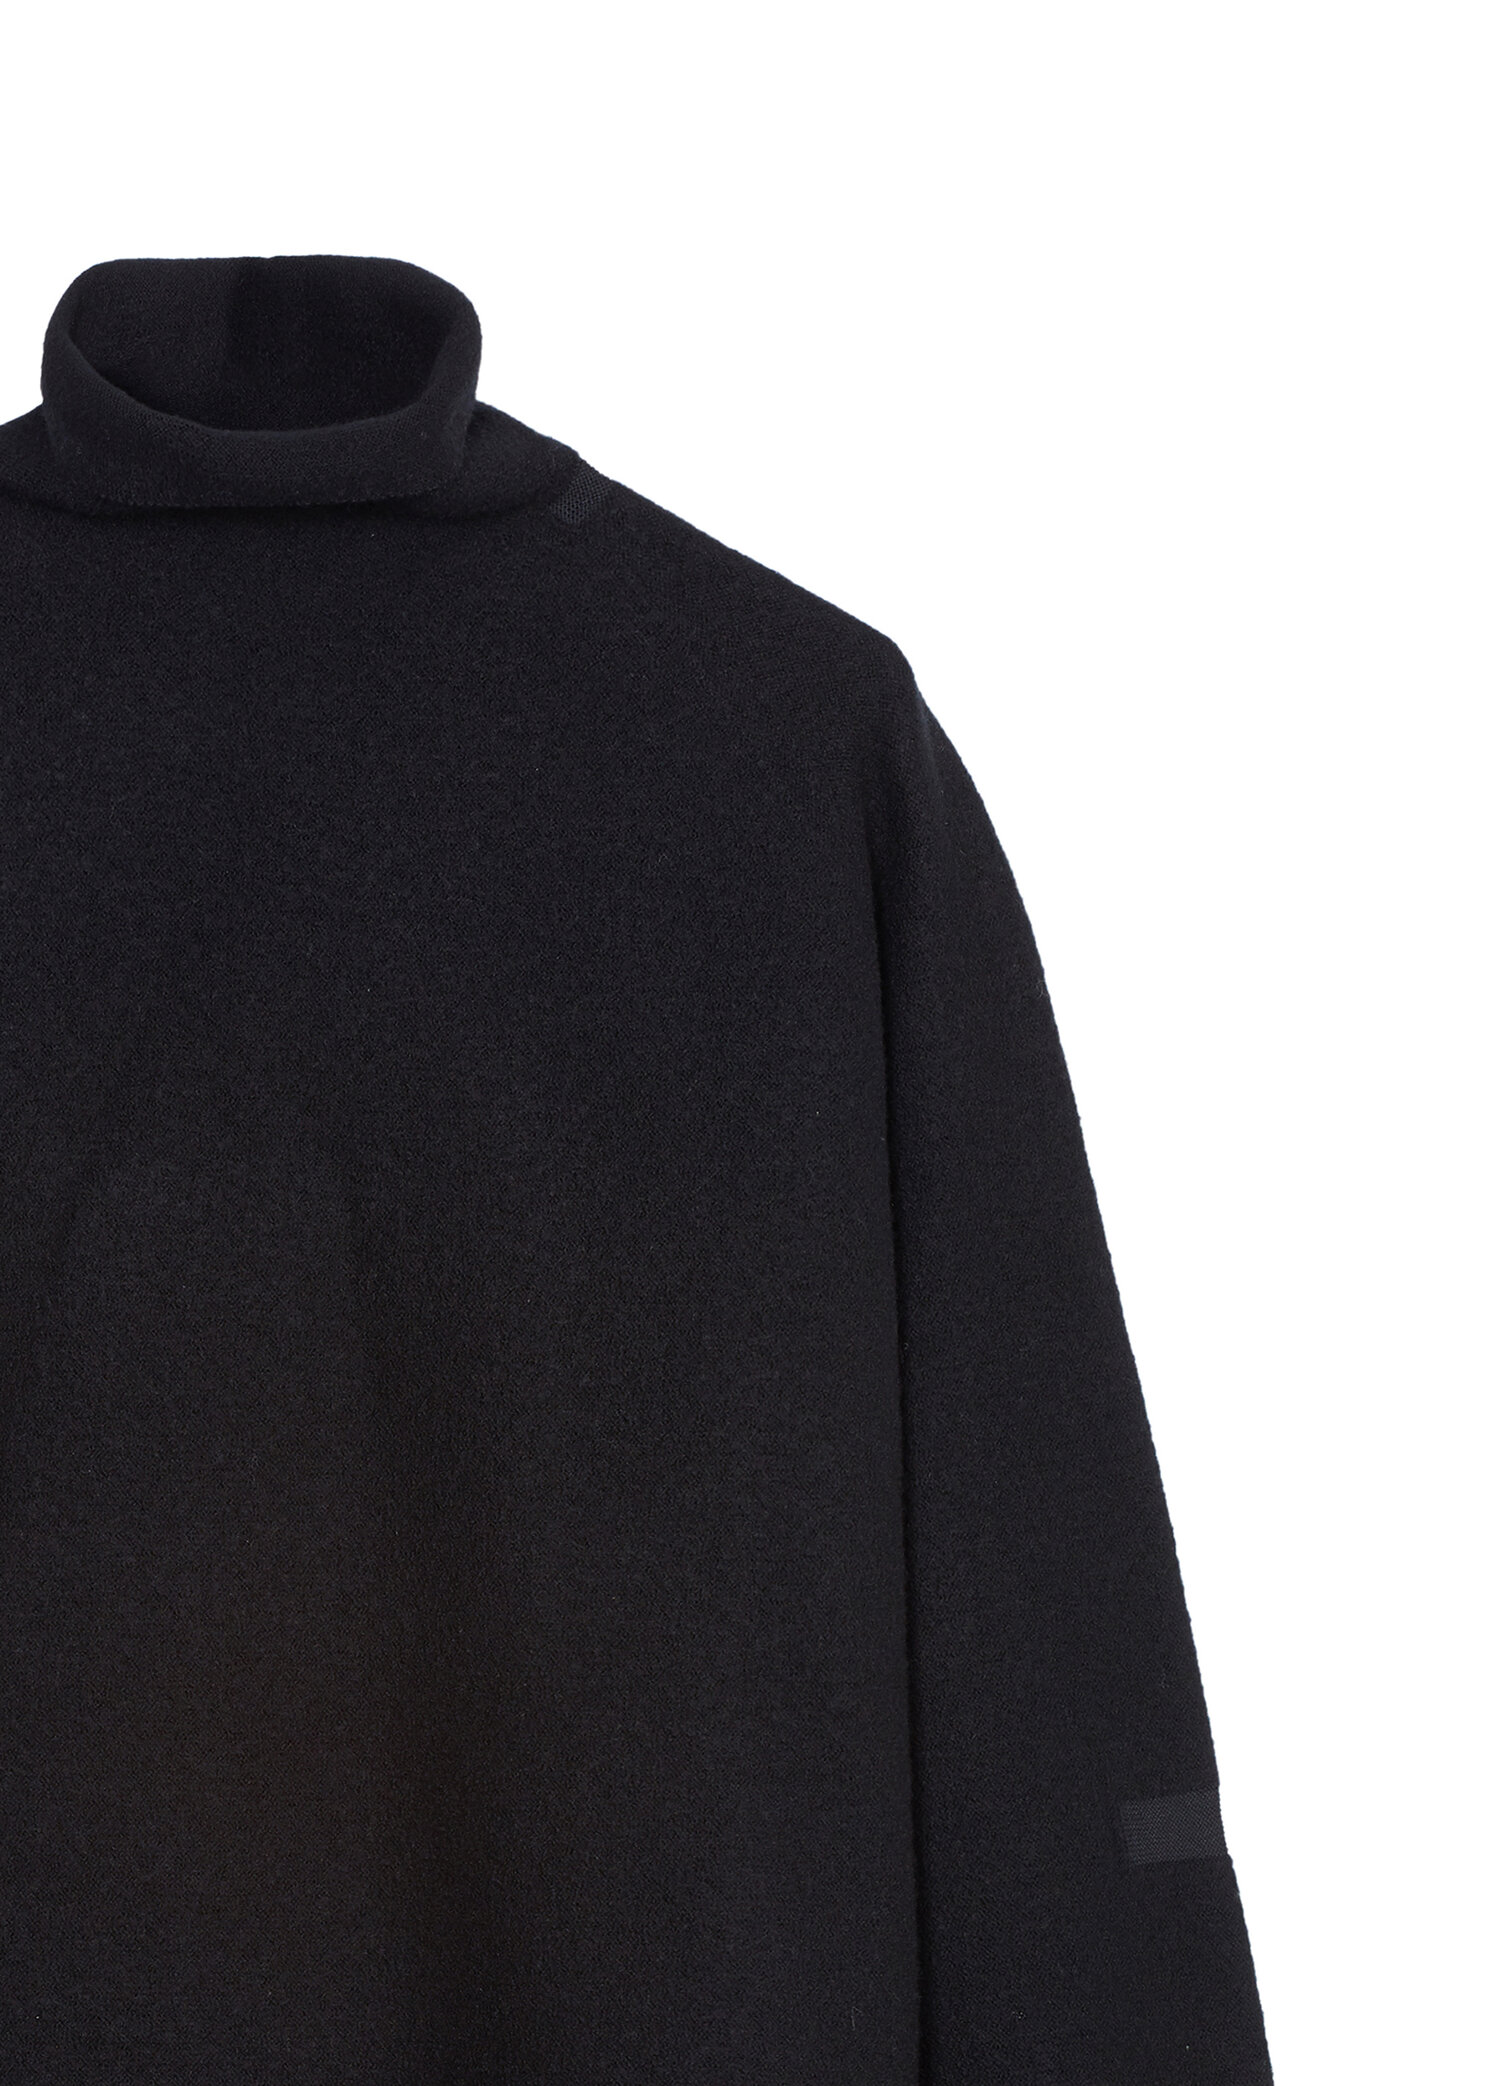 Authentic Nemeth Black Solid Wool Top on sale at JHROP. Luxury Designer  Consignment Resale @jhrop_official